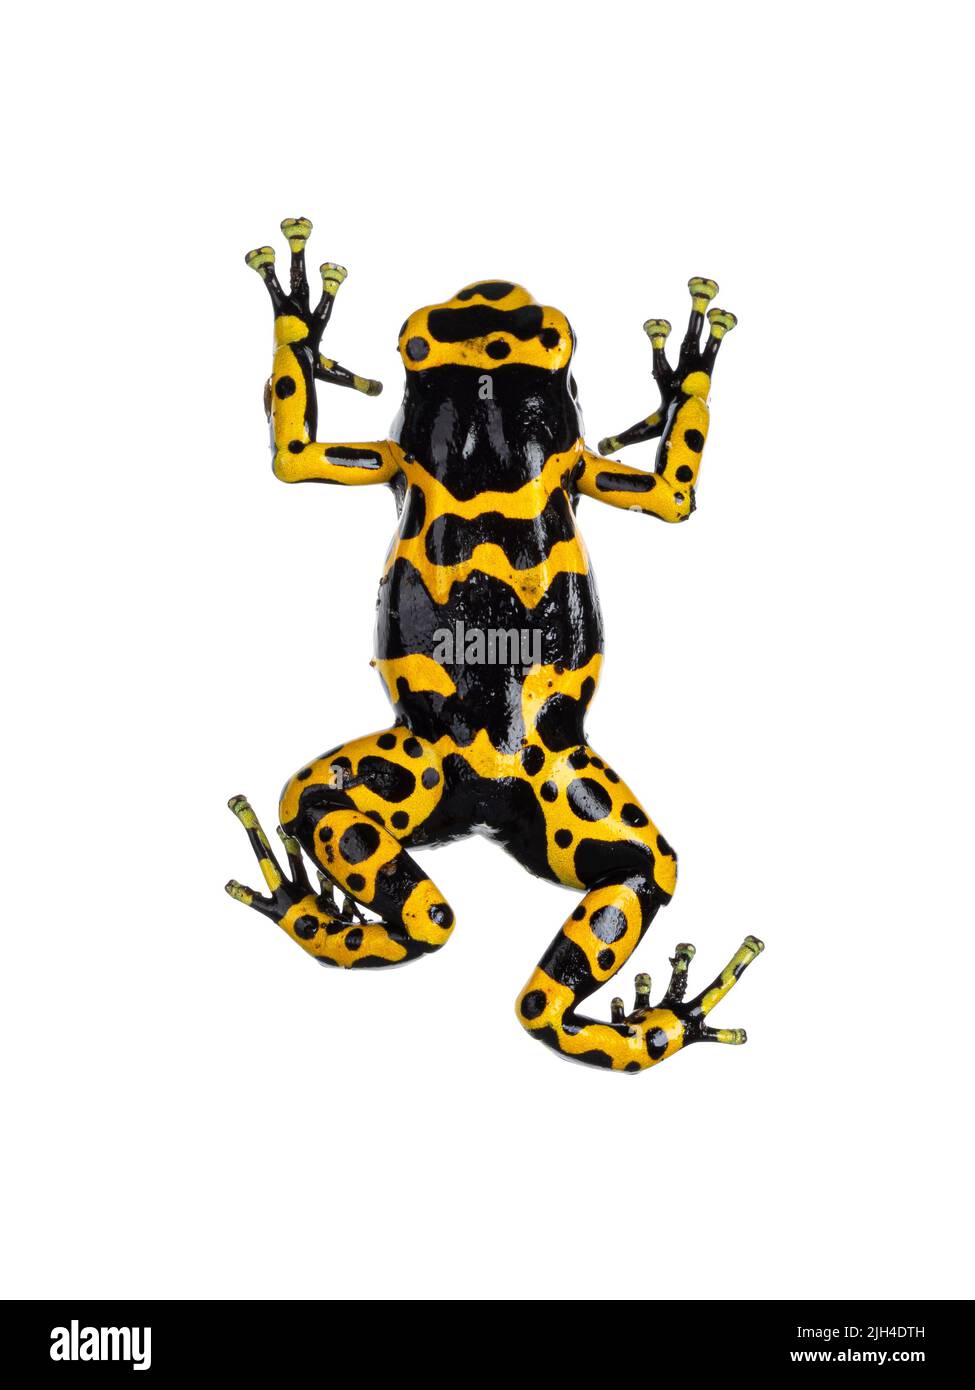 Top view of Colorful Yellow-banded Poison Dart Frog aka Dendrobates leucomelas. Isolated on a white background. Stock Photo